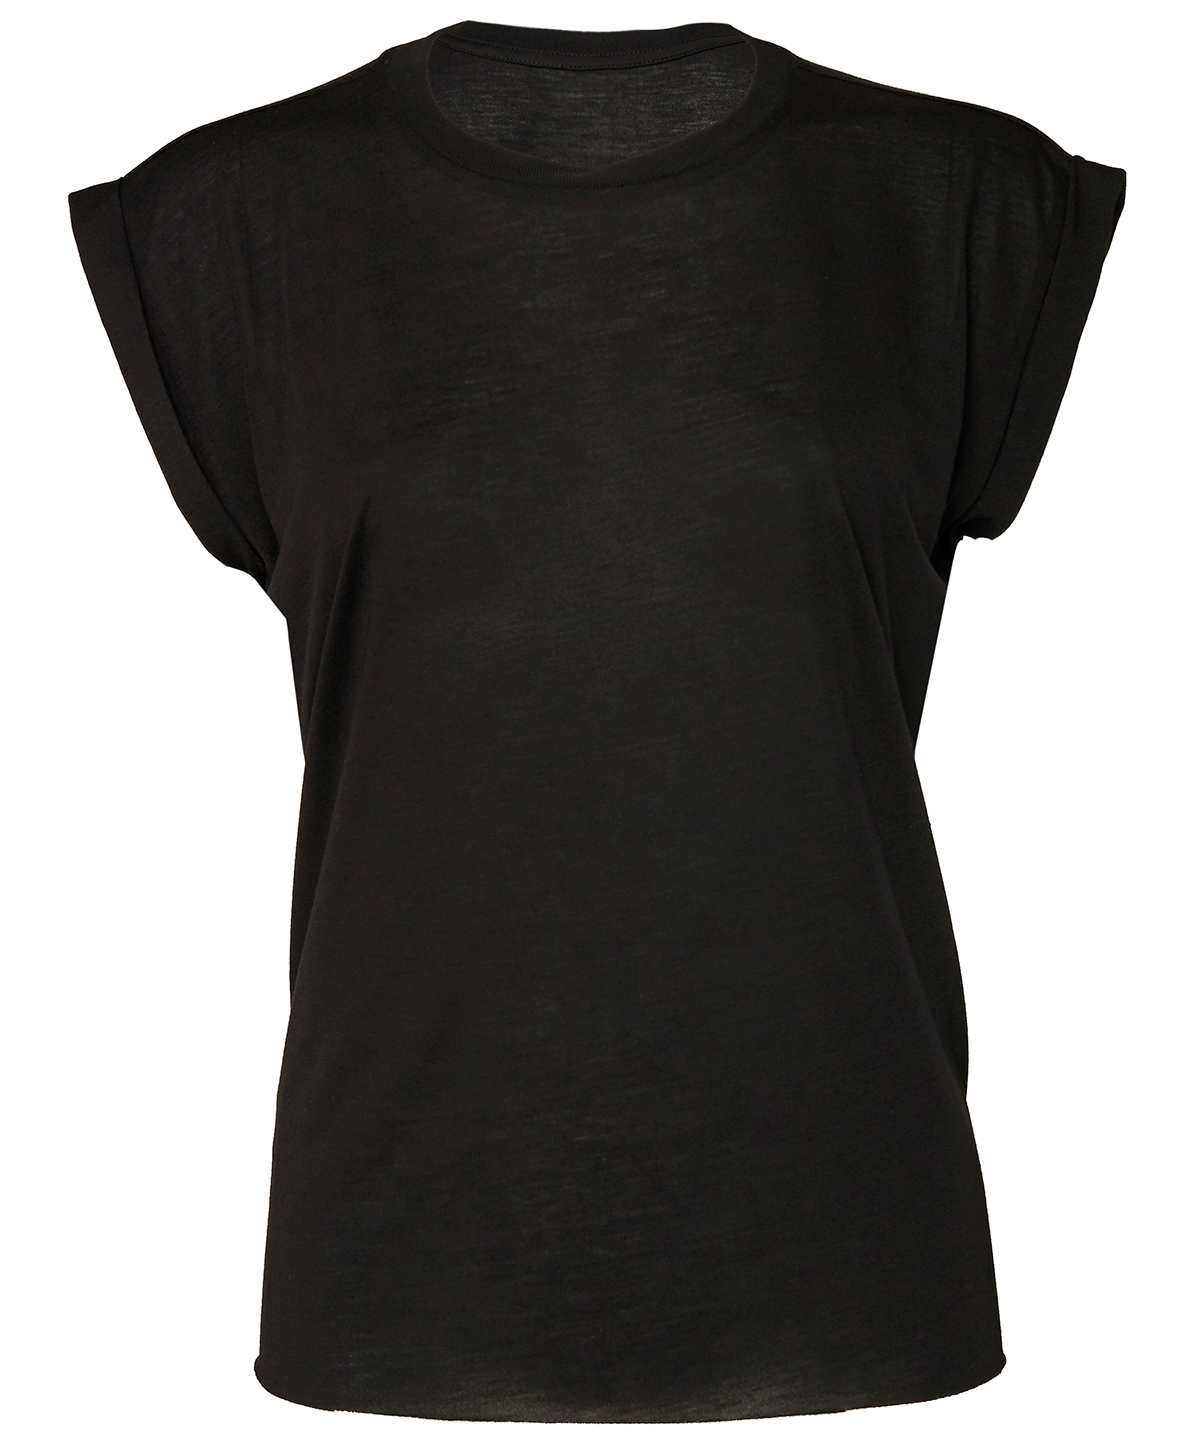 Women's flowy muscle tee with rolled cuff